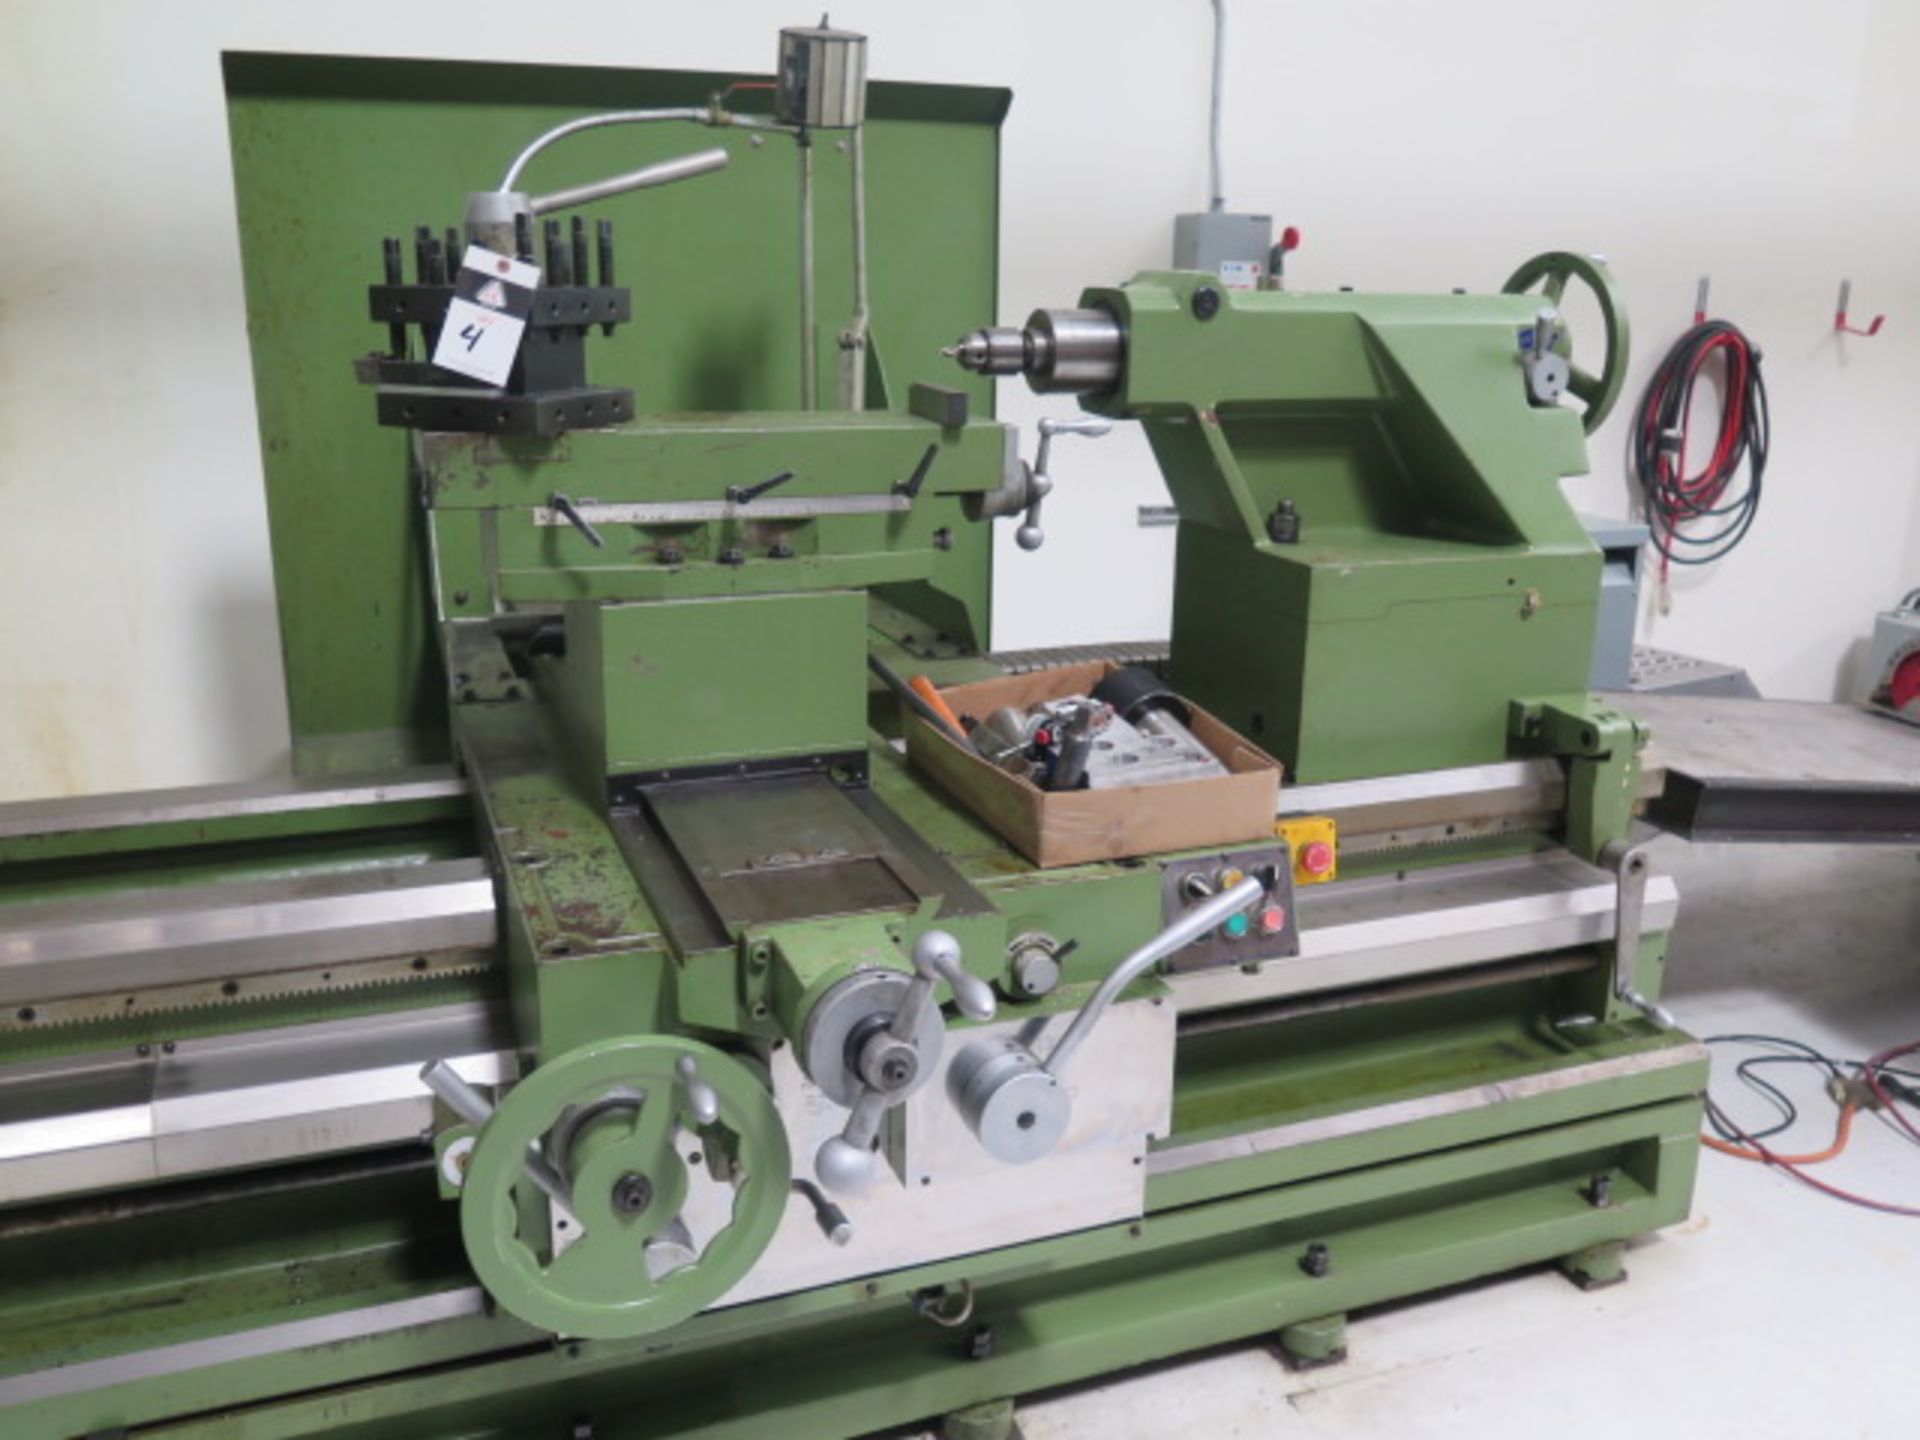 2008 Eisen PS-4560 45” x 60” Geared Head Lathe s/n 08120678 w/ 6” Thru Spindle Bore, 7-700 RPM, - Image 10 of 16